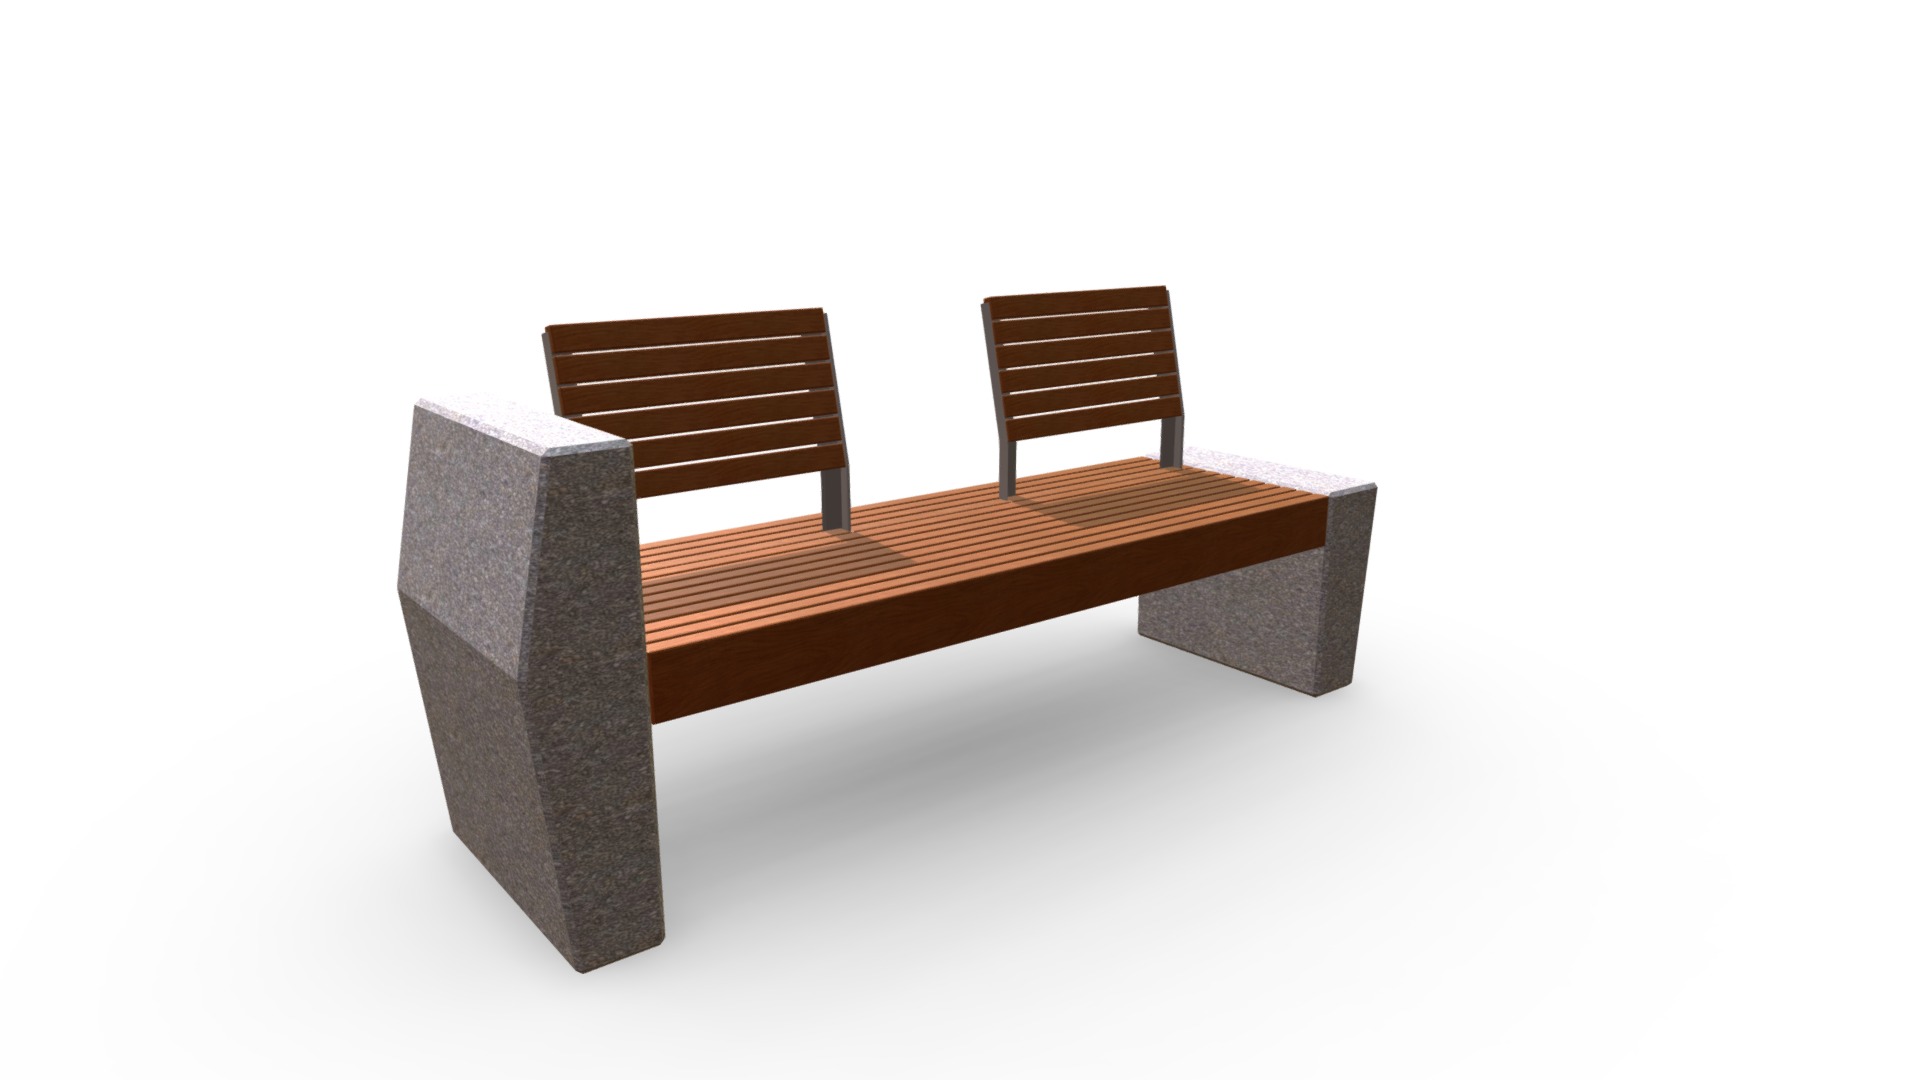 3D model Kolekcija 1-4 - This is a 3D model of the Kolekcija 1-4. The 3D model is about a bench with a cushion.